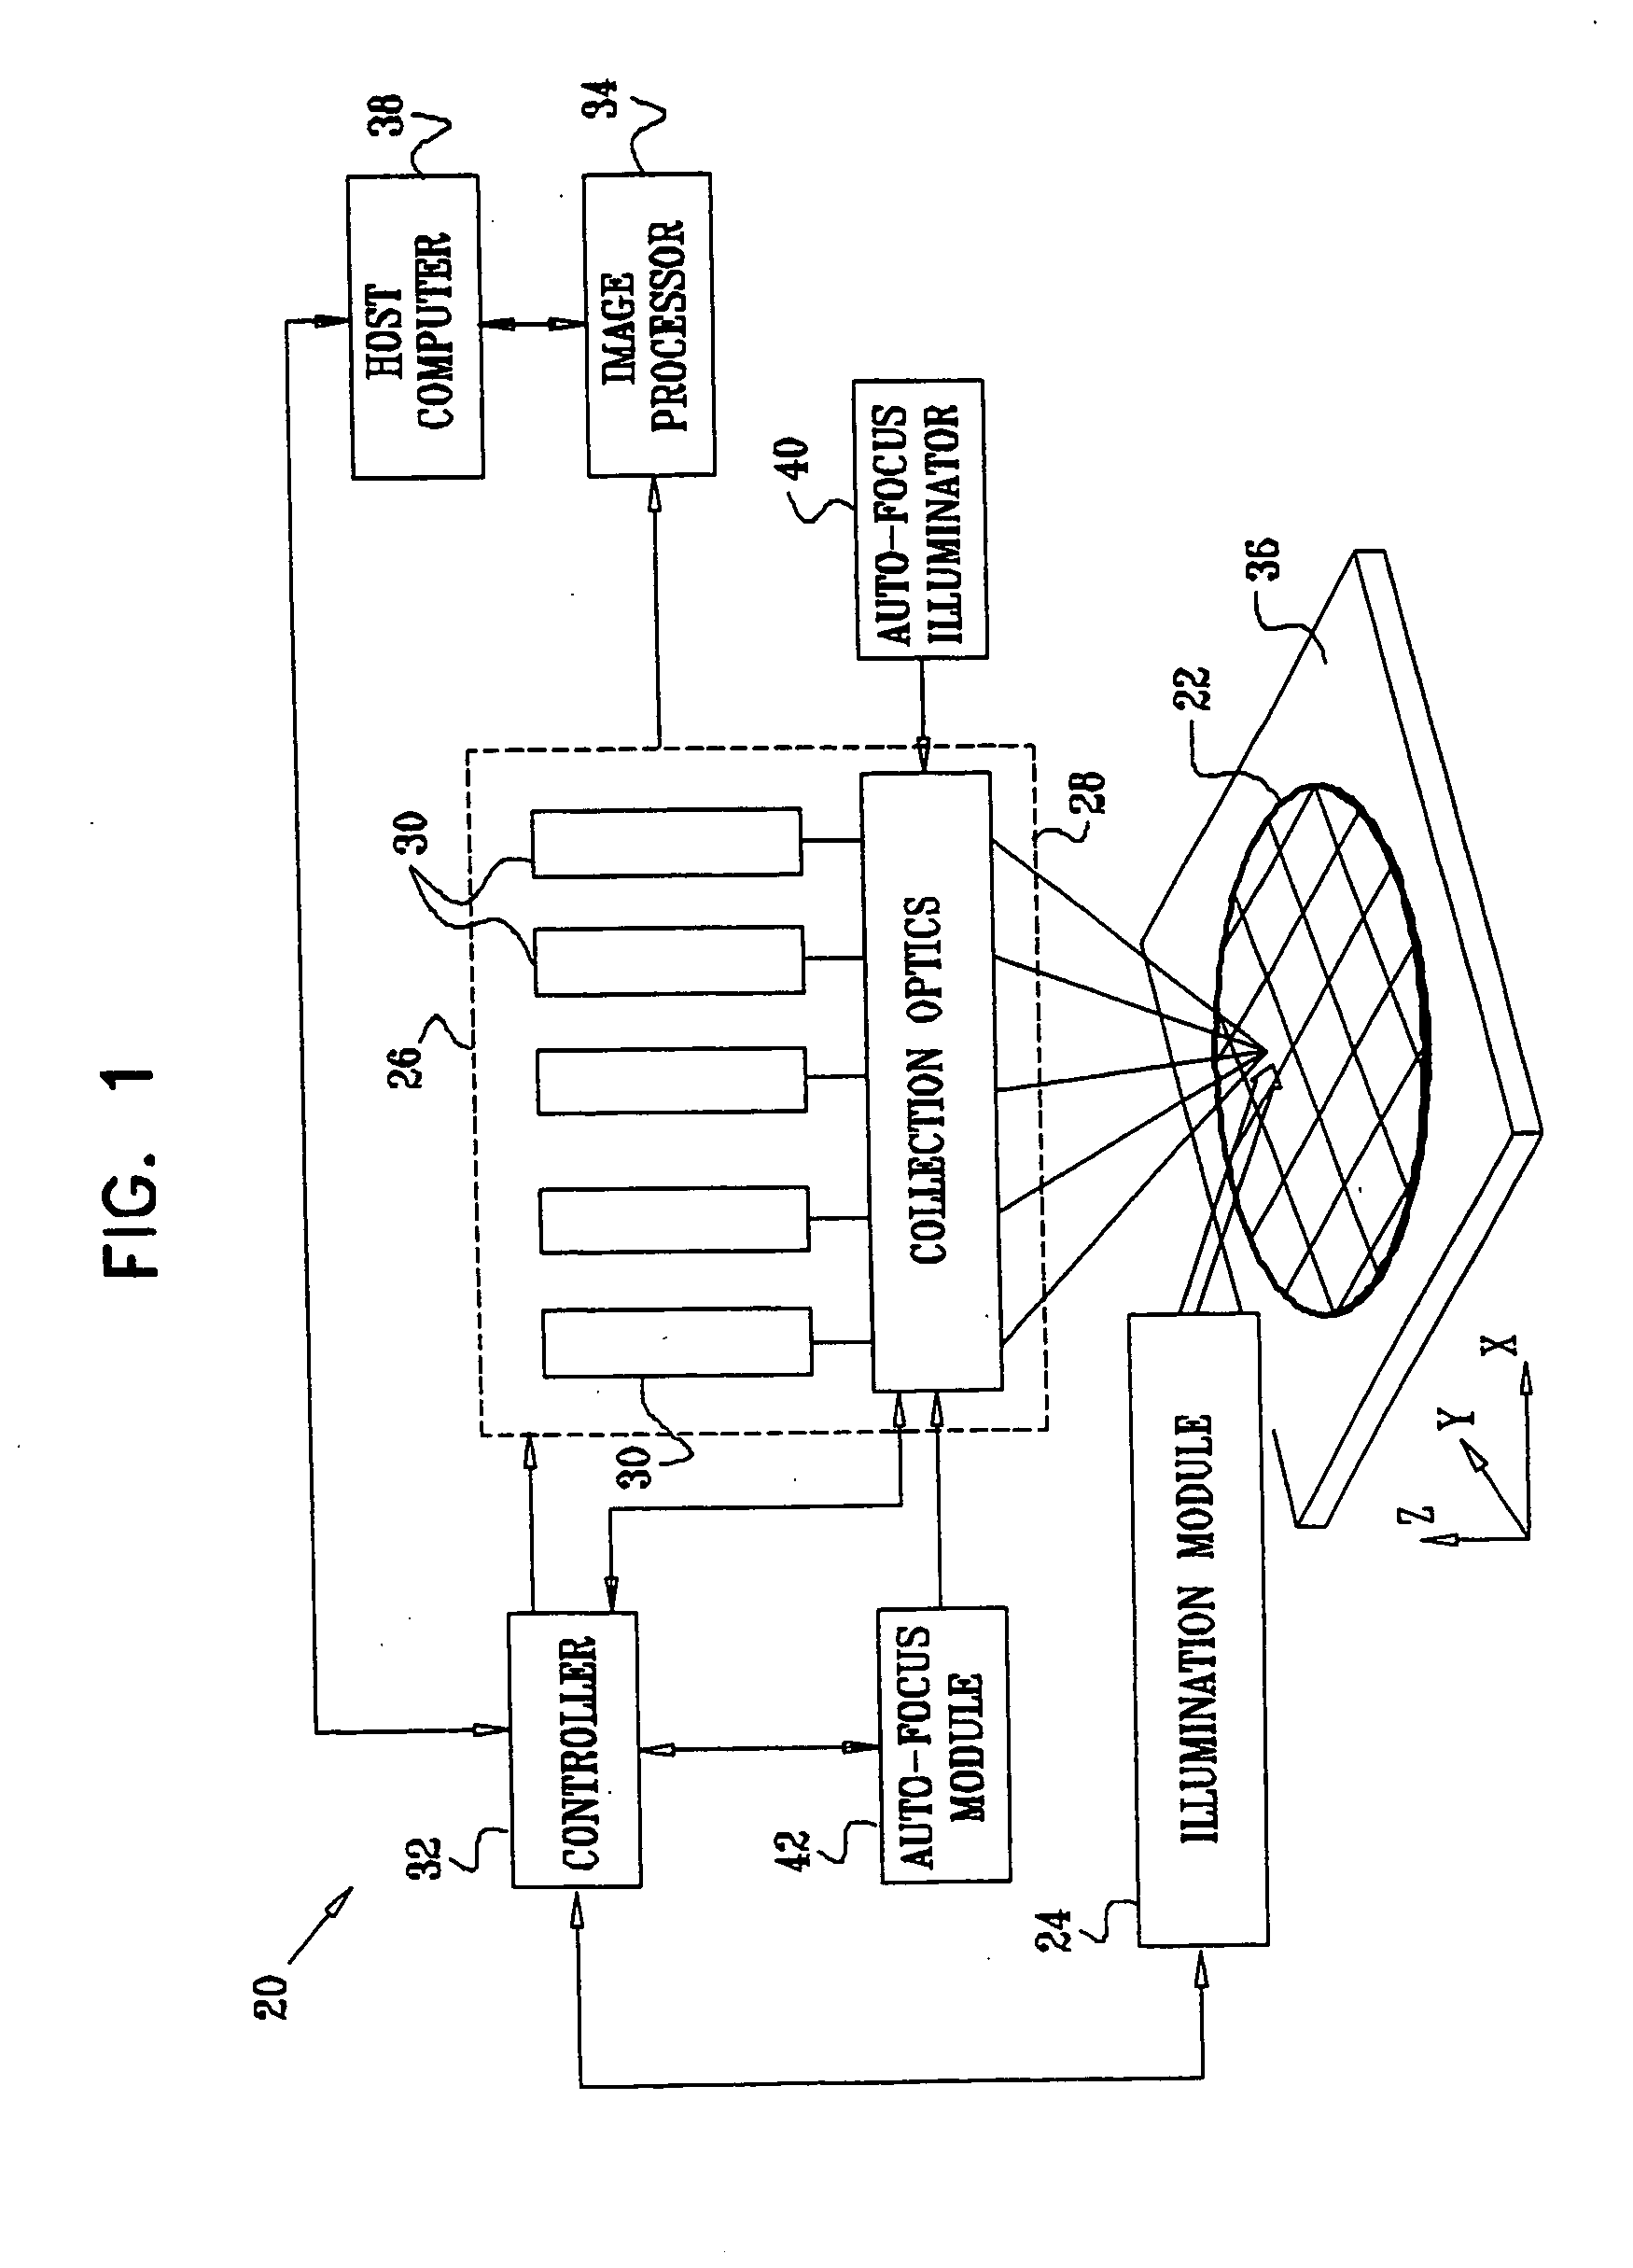 Illumination system for optical inspection